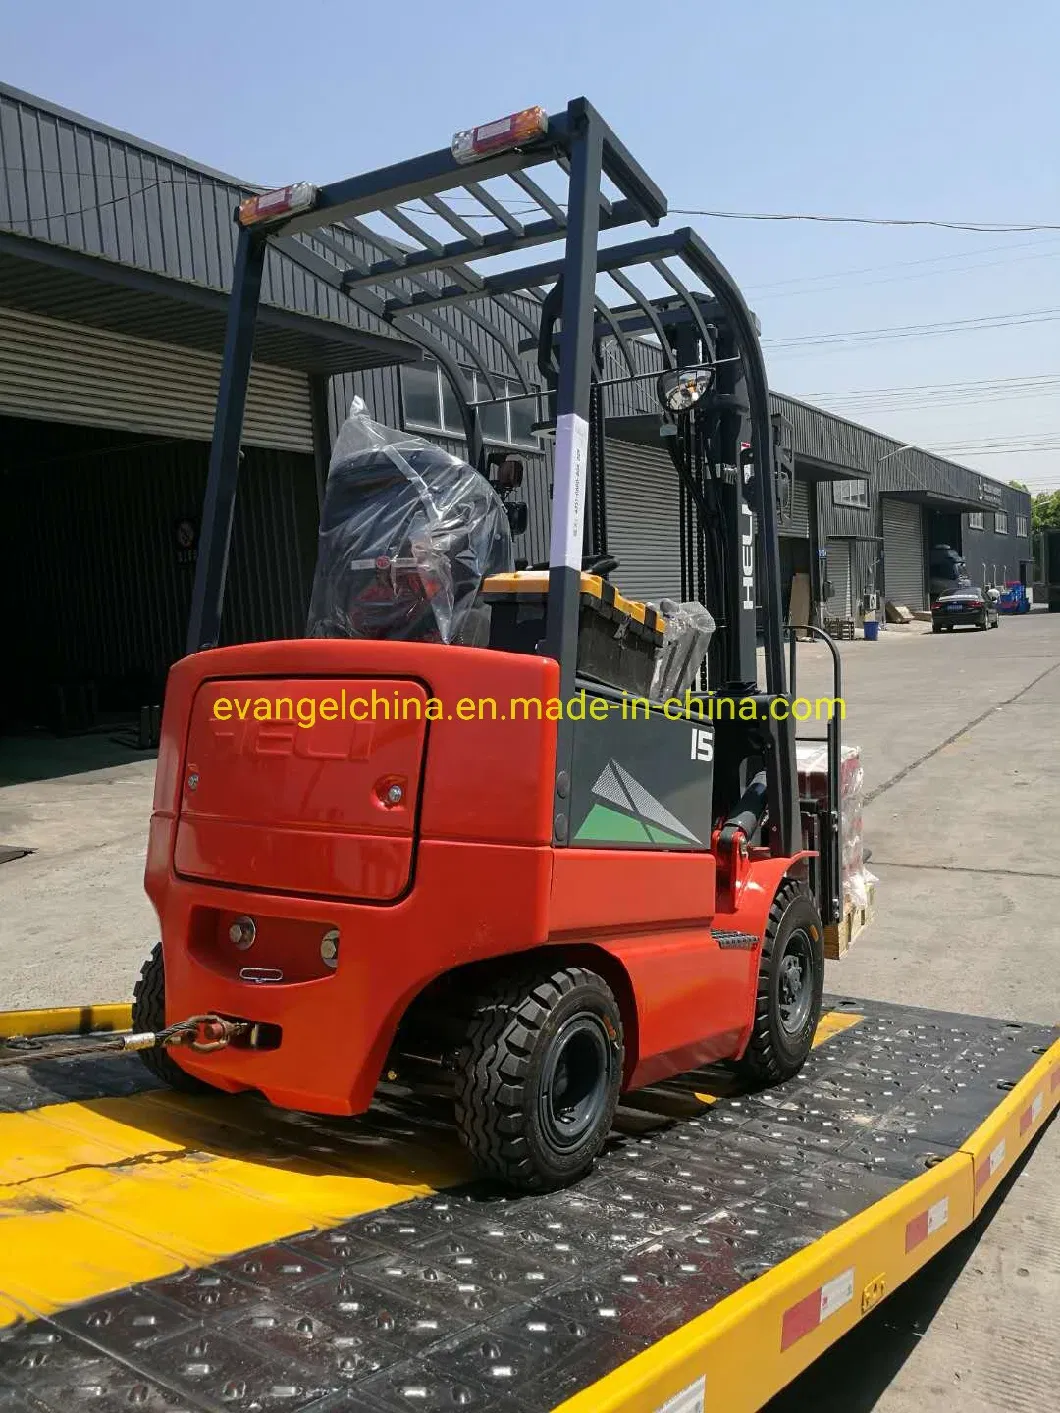 Heli 1.5 Ton AC Electric Battery Forklift Cpd15